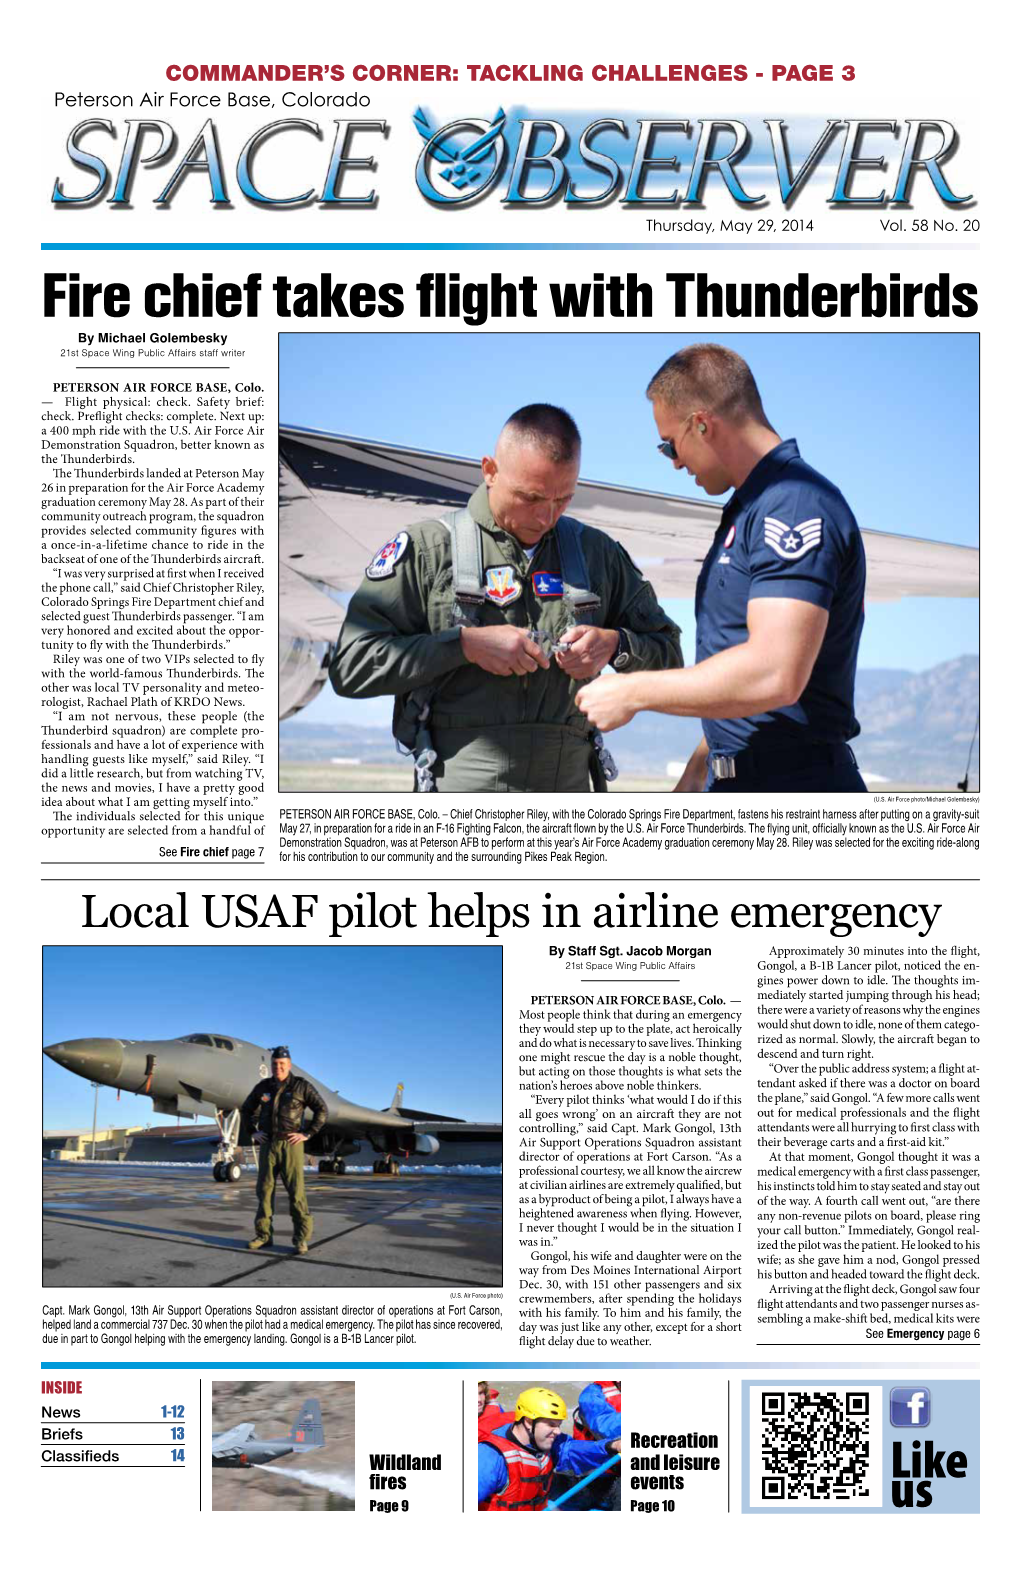 Fire Chief Takes Flight with Thunderbirds by Michael Golembesky 21St Space Wing Public Affairs Staff Writer